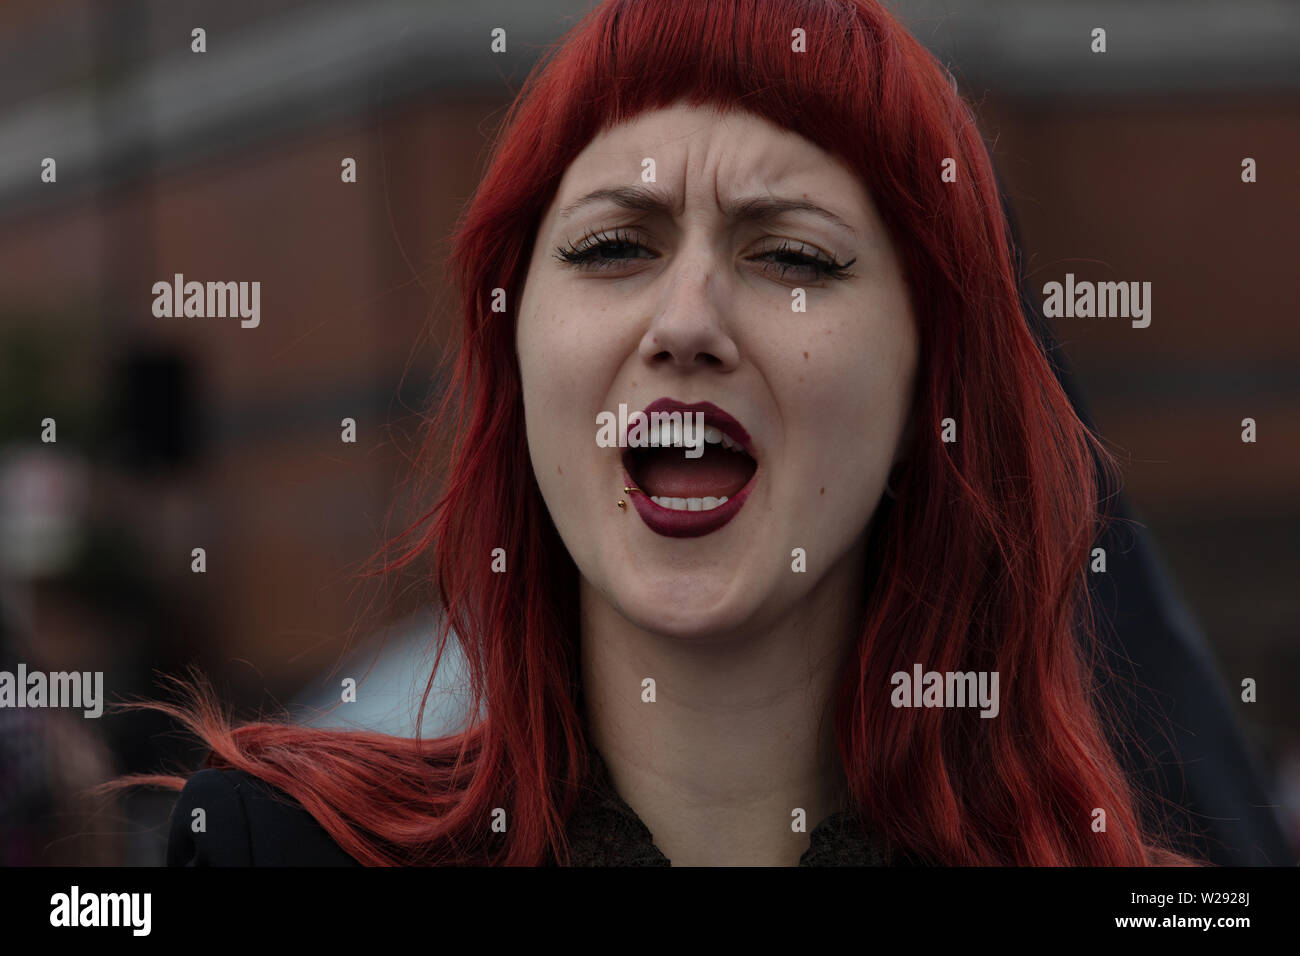 London, UK. 2nd July 2019. Extinction Rebellion Arts and Culture Group creating a silent procession to and theatre in front of several fossil fuel companies. The protest play is based on Bizet's opera Carmen, with real life actors and an opera singer. Pictured: actress during the protest. Credit: Joe Kuis / Alamy News Stock Photo